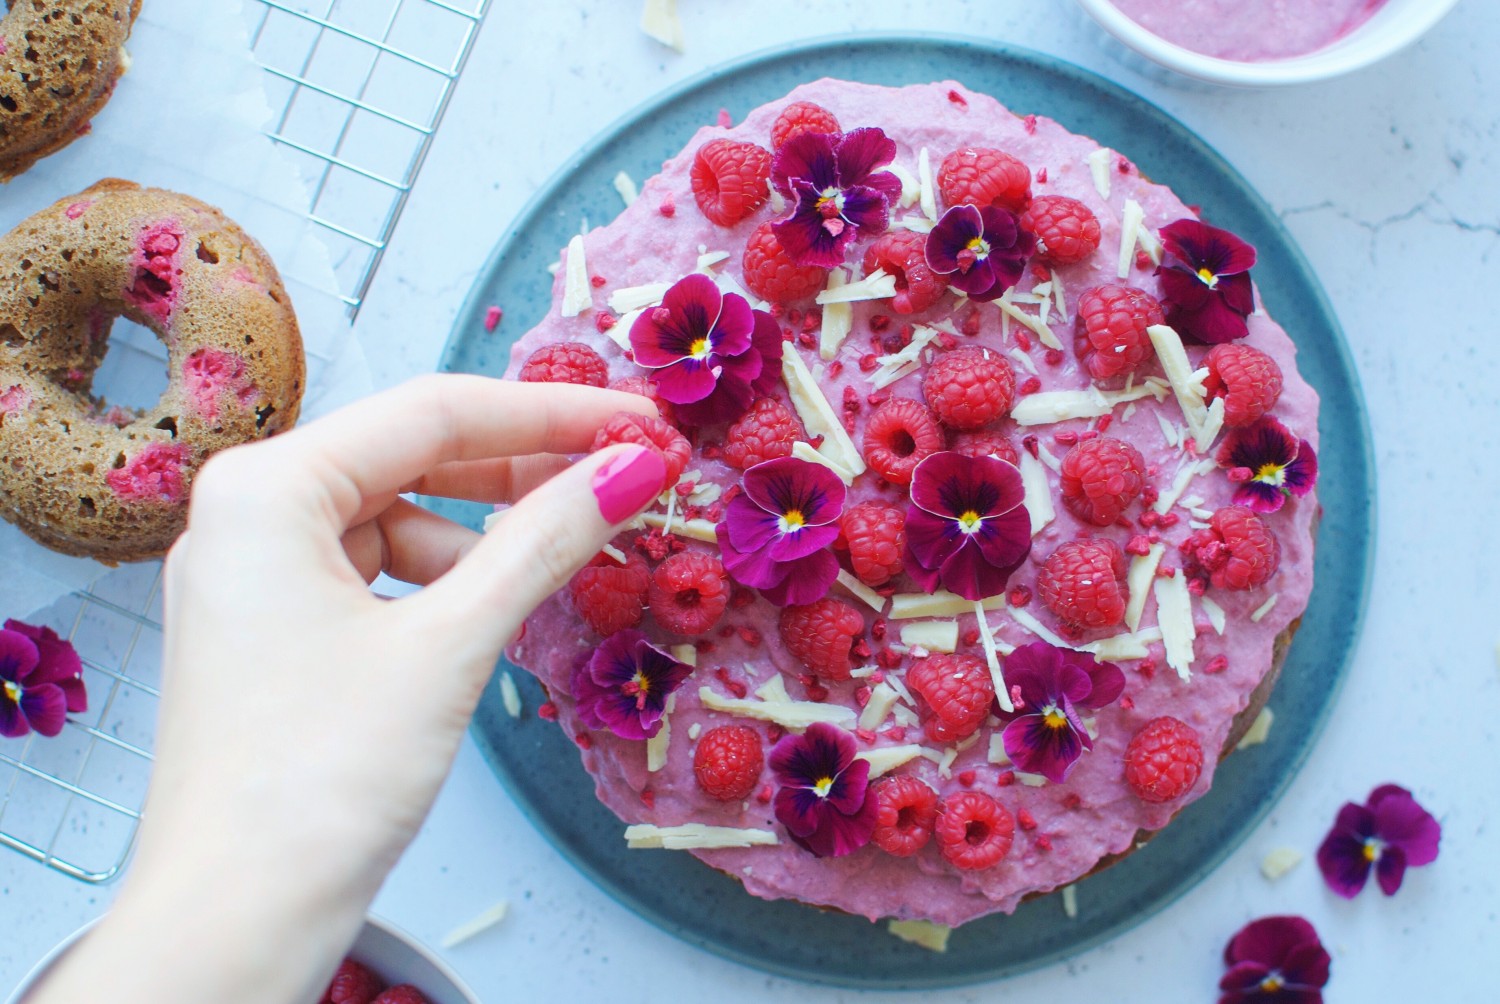 Raspberry &amp; white chocolate cake + donuts // Giveaway winner announced